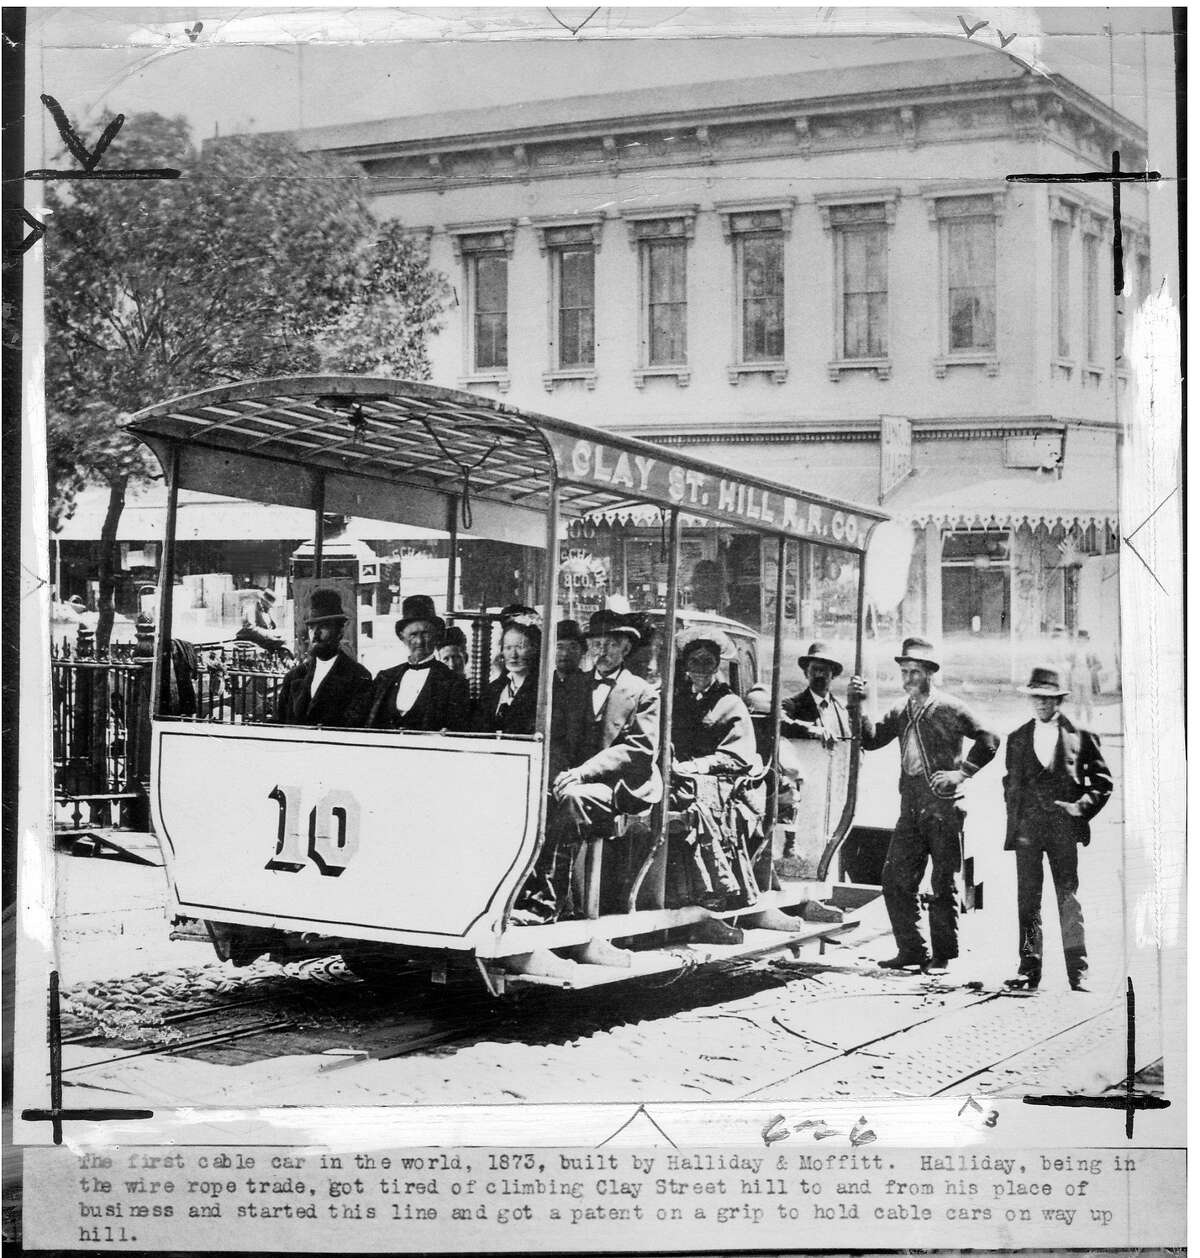 The first cable car in the world, 1873, built by Halliday & Moffitt. Halliday, being in the wire rope trade, got tired of climbing the Clay Street hill to and from his place of business and started this line and got a patent on a grip to hold cable cars on their way up hill.